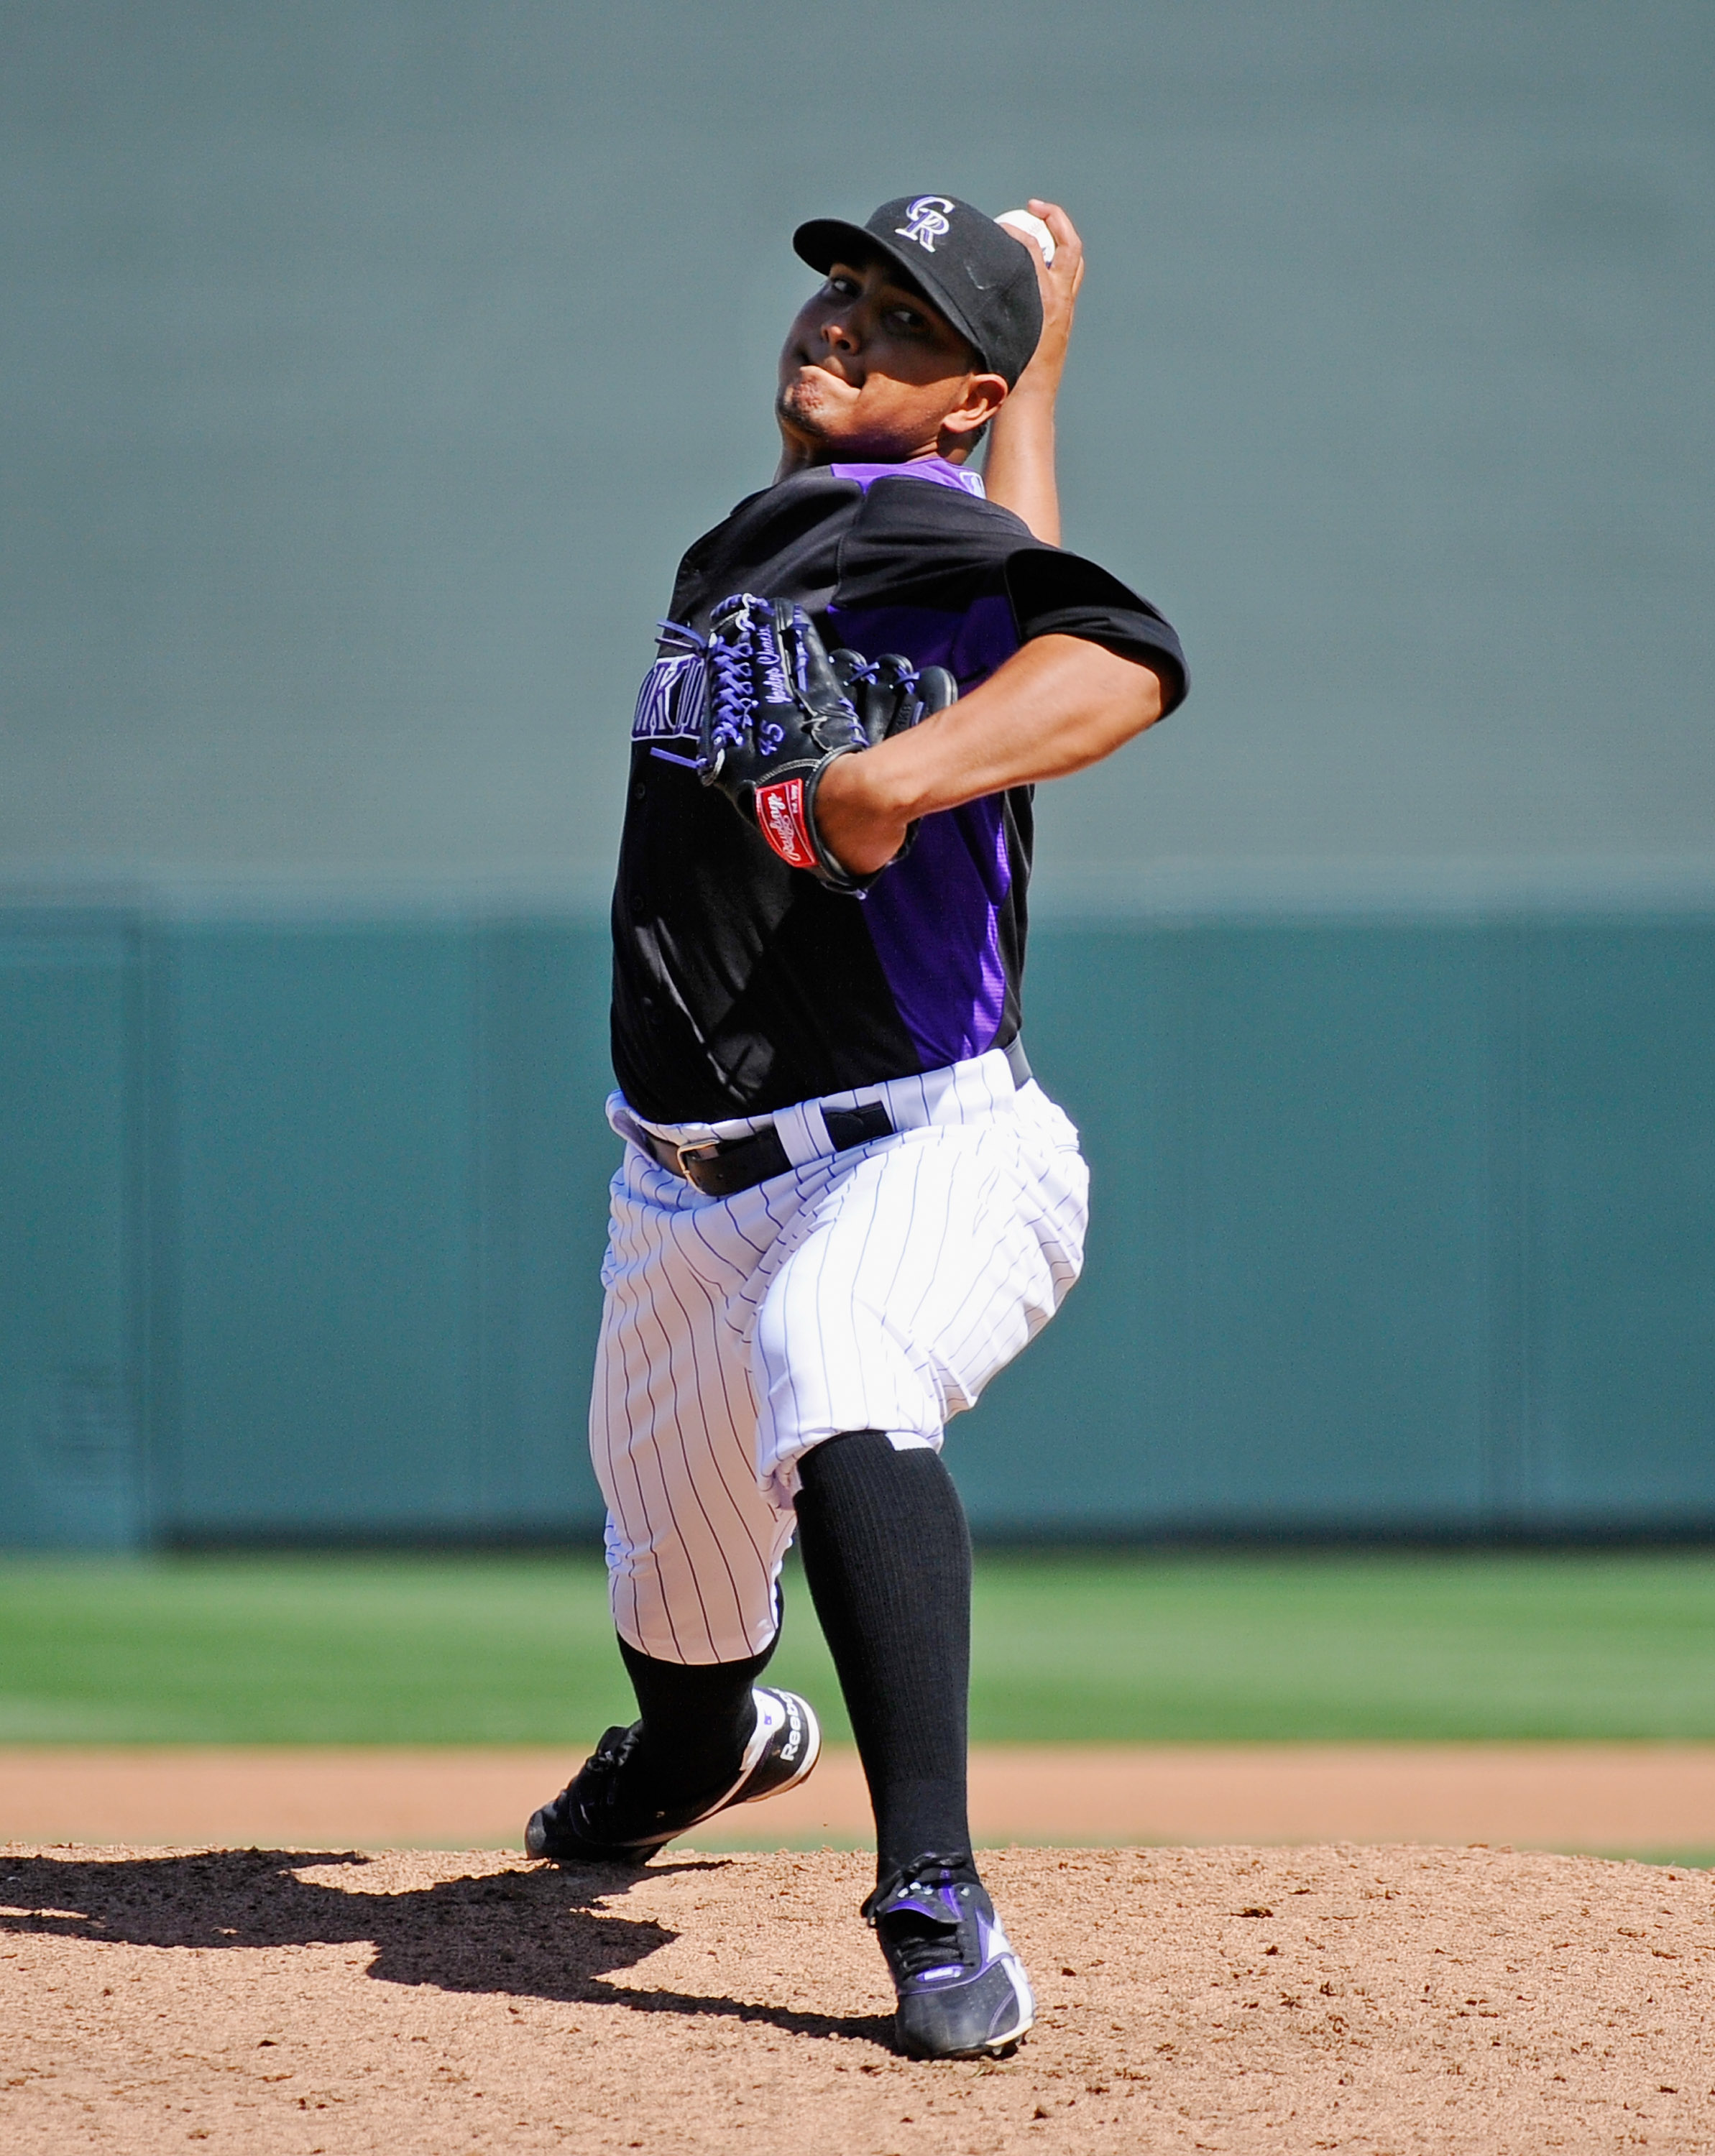 SCOTTSDALE, AZ - MARCH 14:  Pitcher Jhoulys Chacin #45 of the Colorodo Rockies against the Cincinnati Reds  during the spring training baseball game at Salt River Fields at Talking Stick on March 14, 2011 in Scottsdale, Arizona.  (Photo by Kevork Djansezi